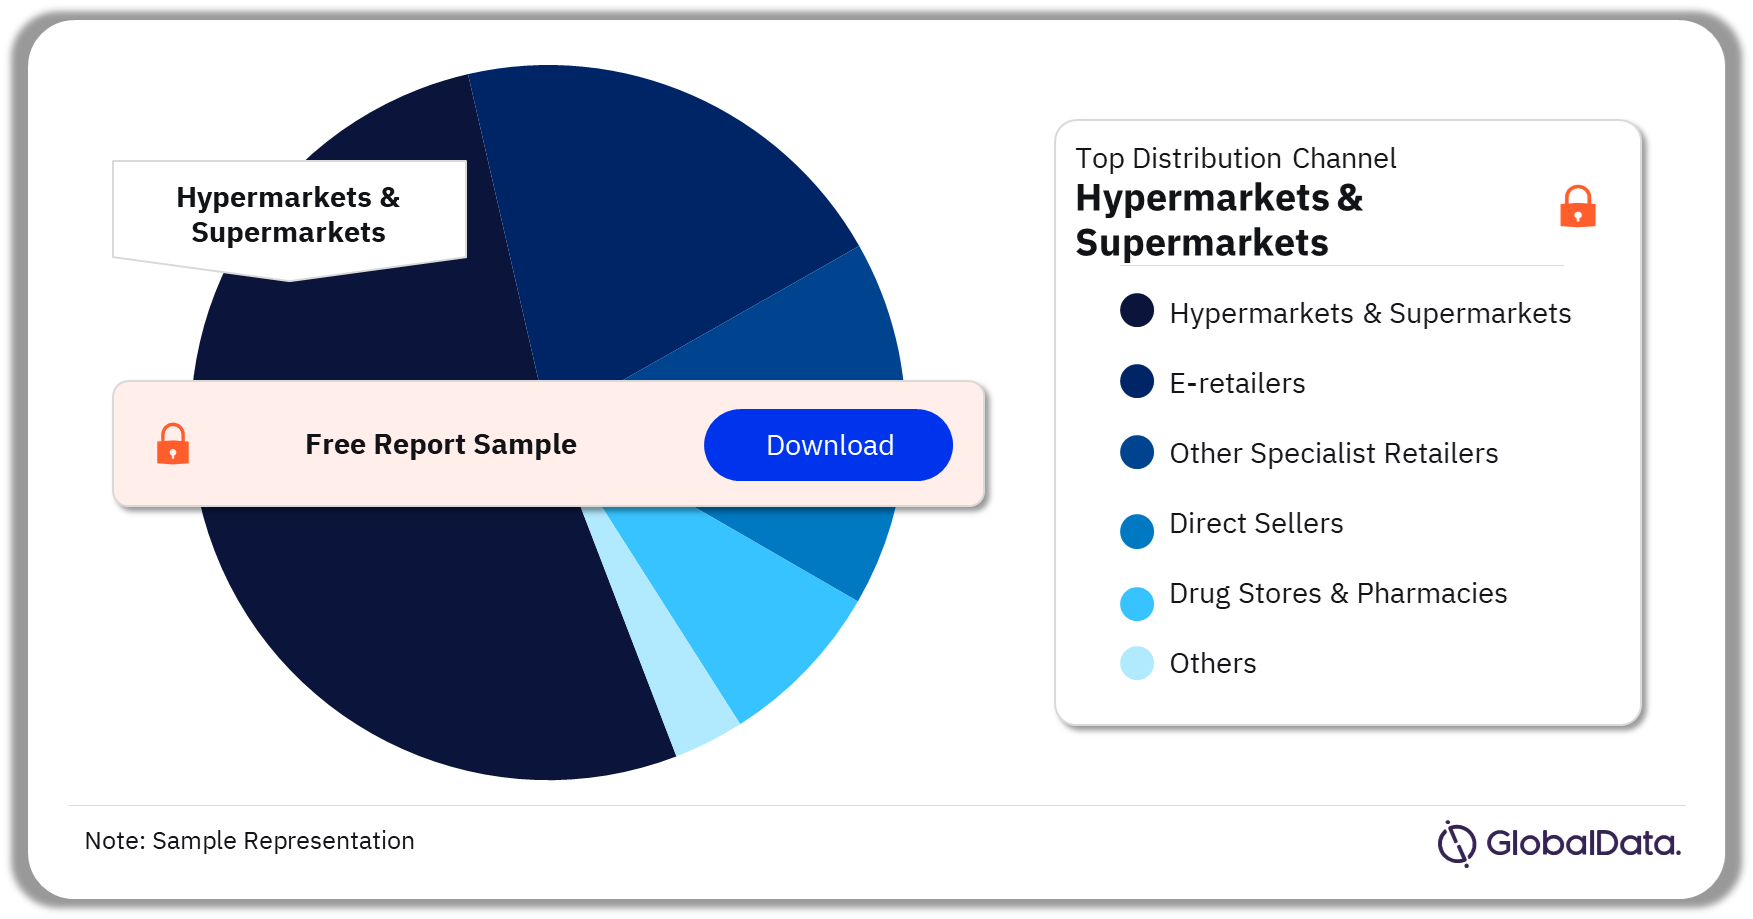 Pet Supplements Market Analysis by Distribution Channel, 2023 (%)